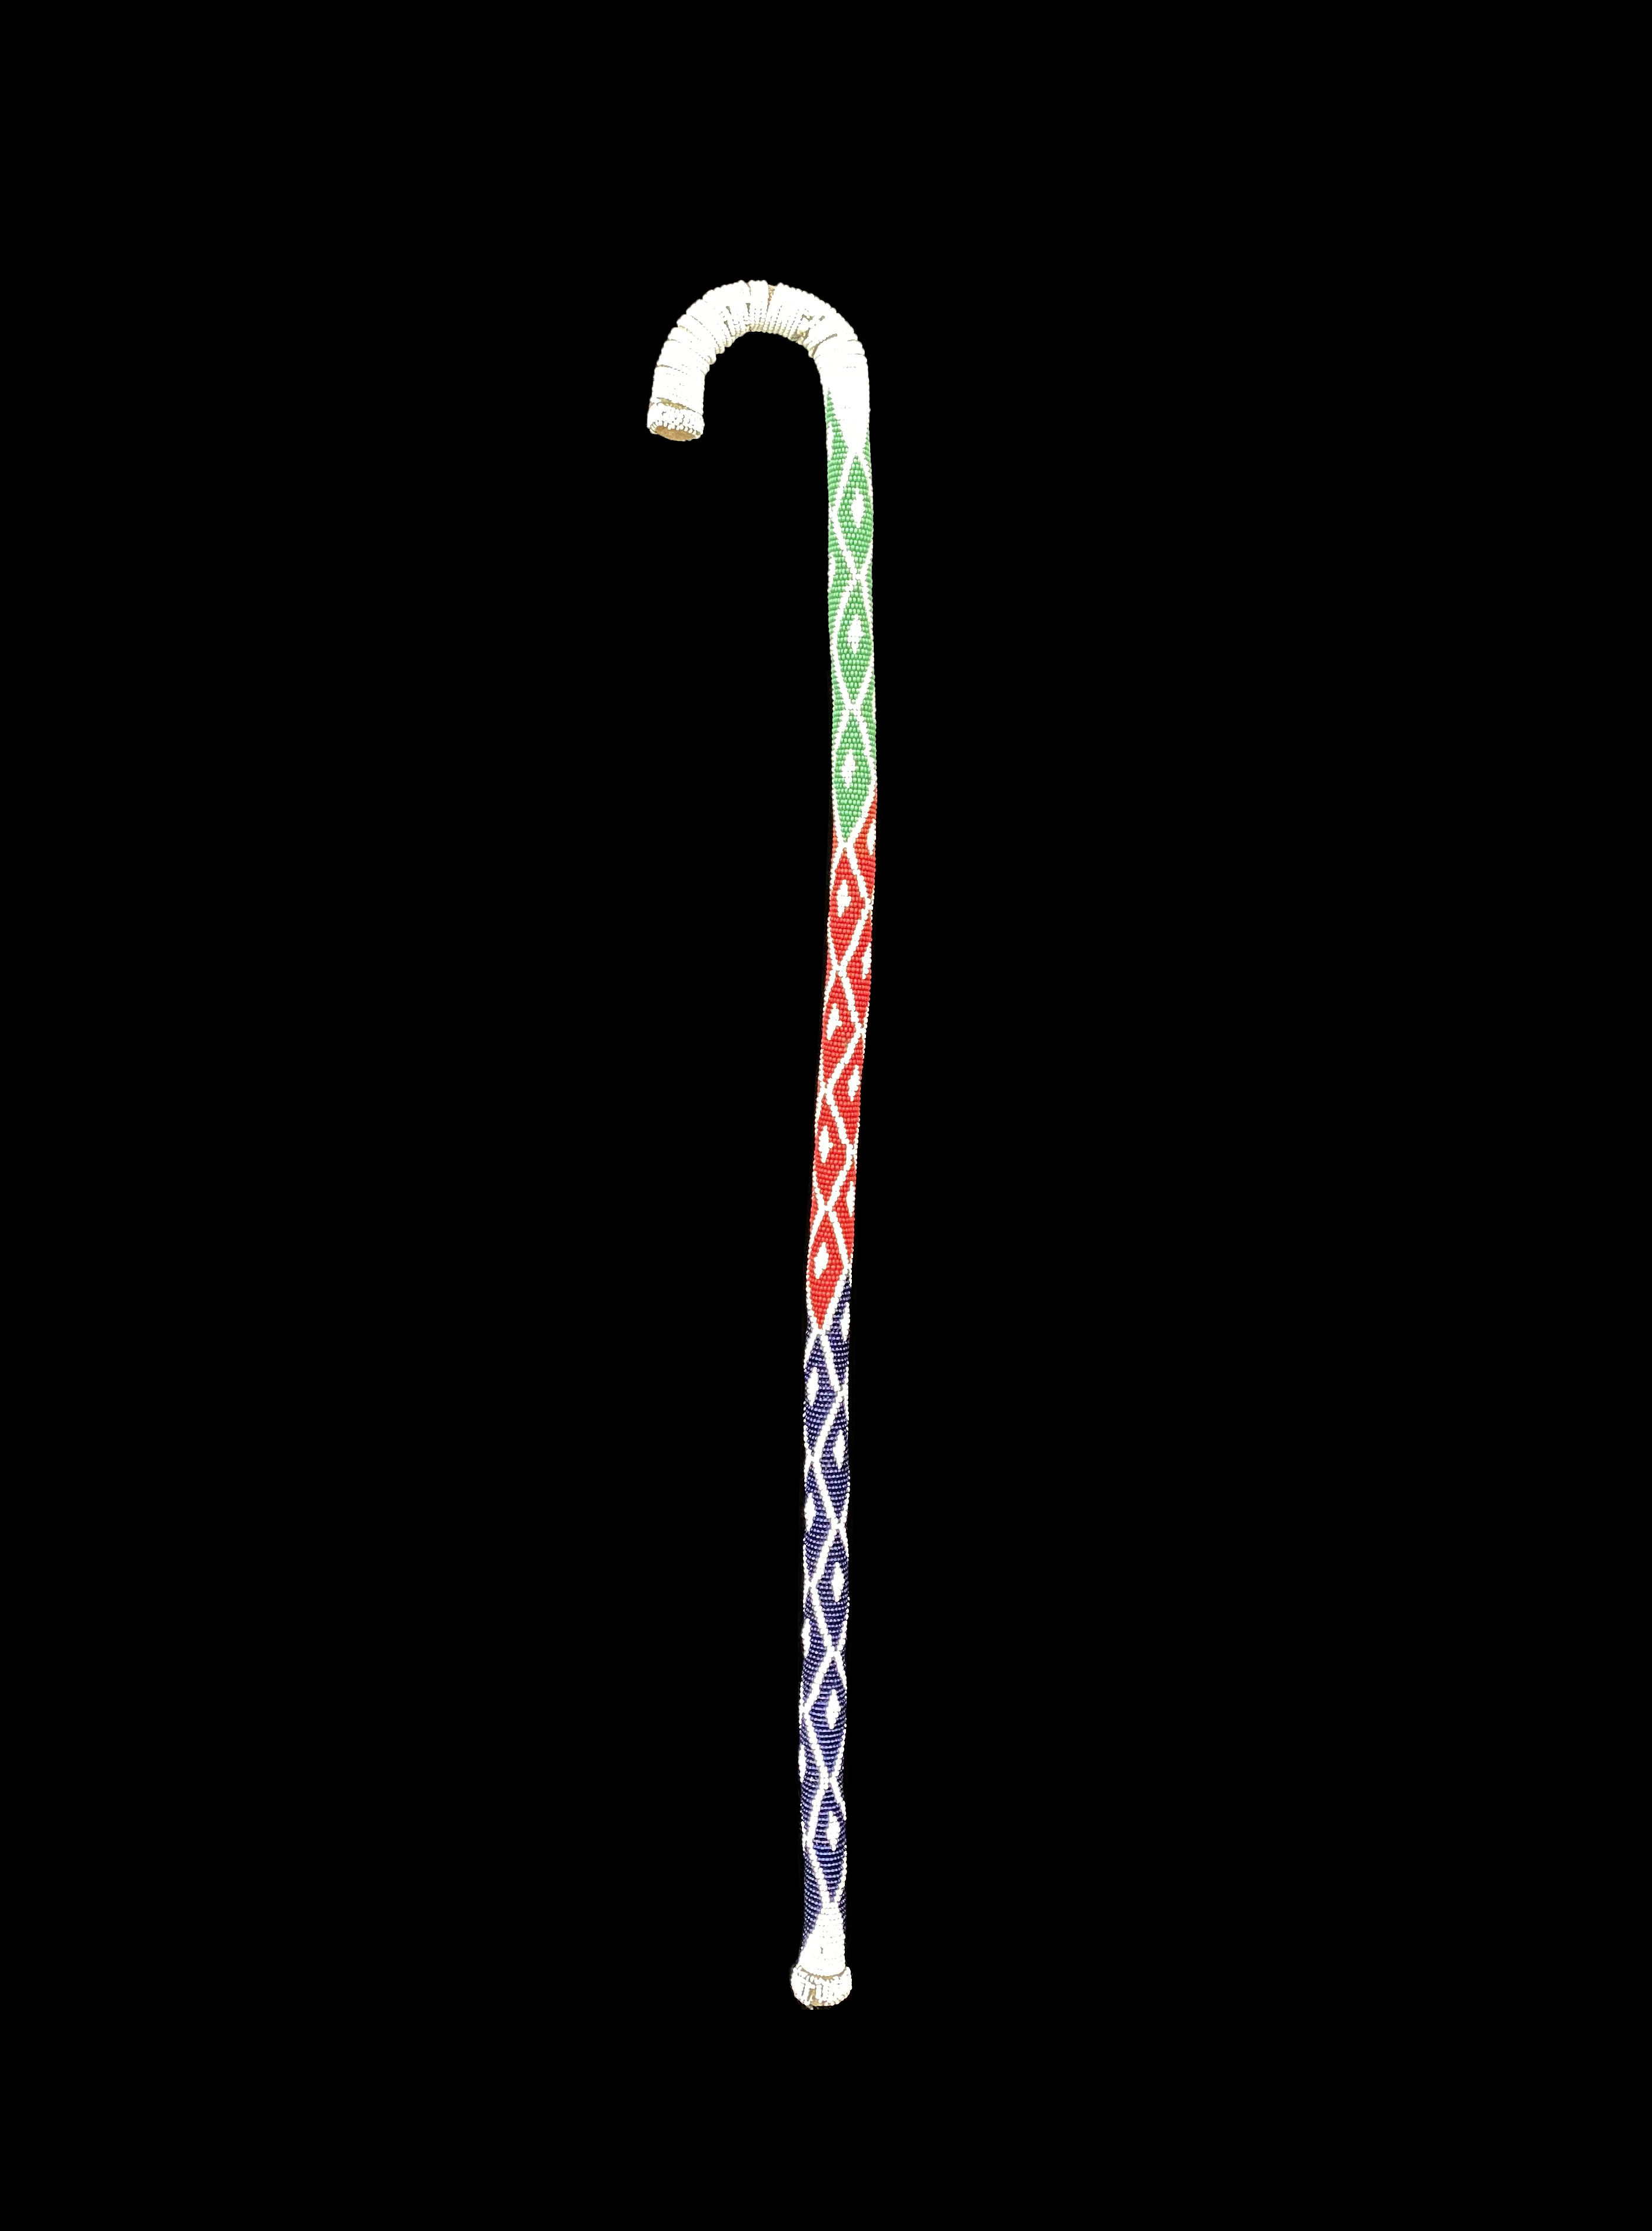 Beaded Cane 1 - Zulu People, South Africa